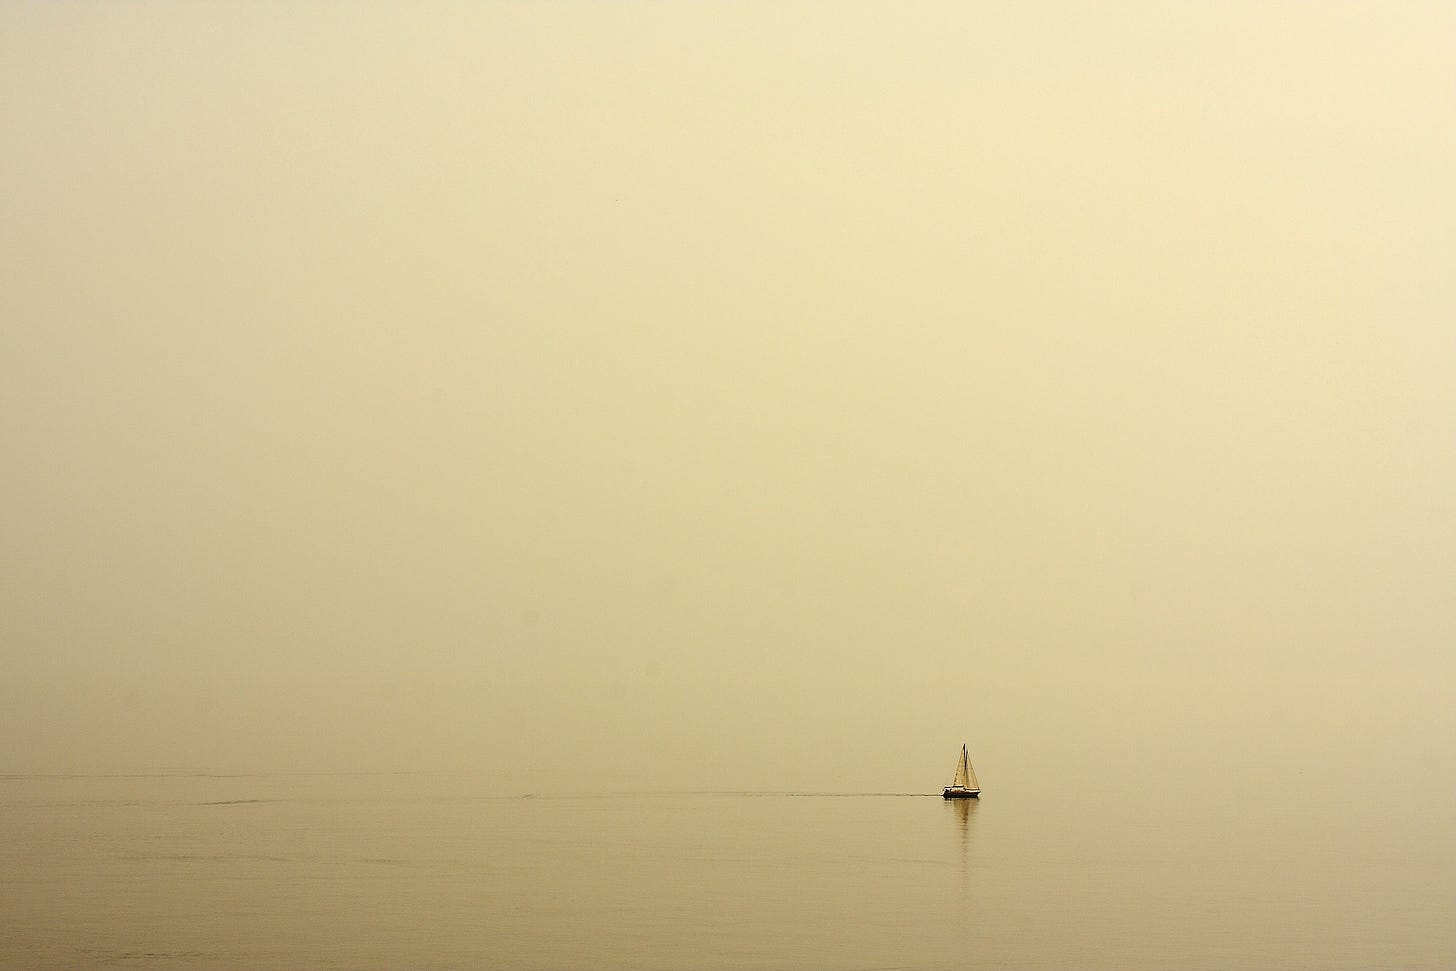 A photograph of a small, solitary sailboat on a lake. It's hazy and foggy. The picture conveys a sense of loneliness and isolation.